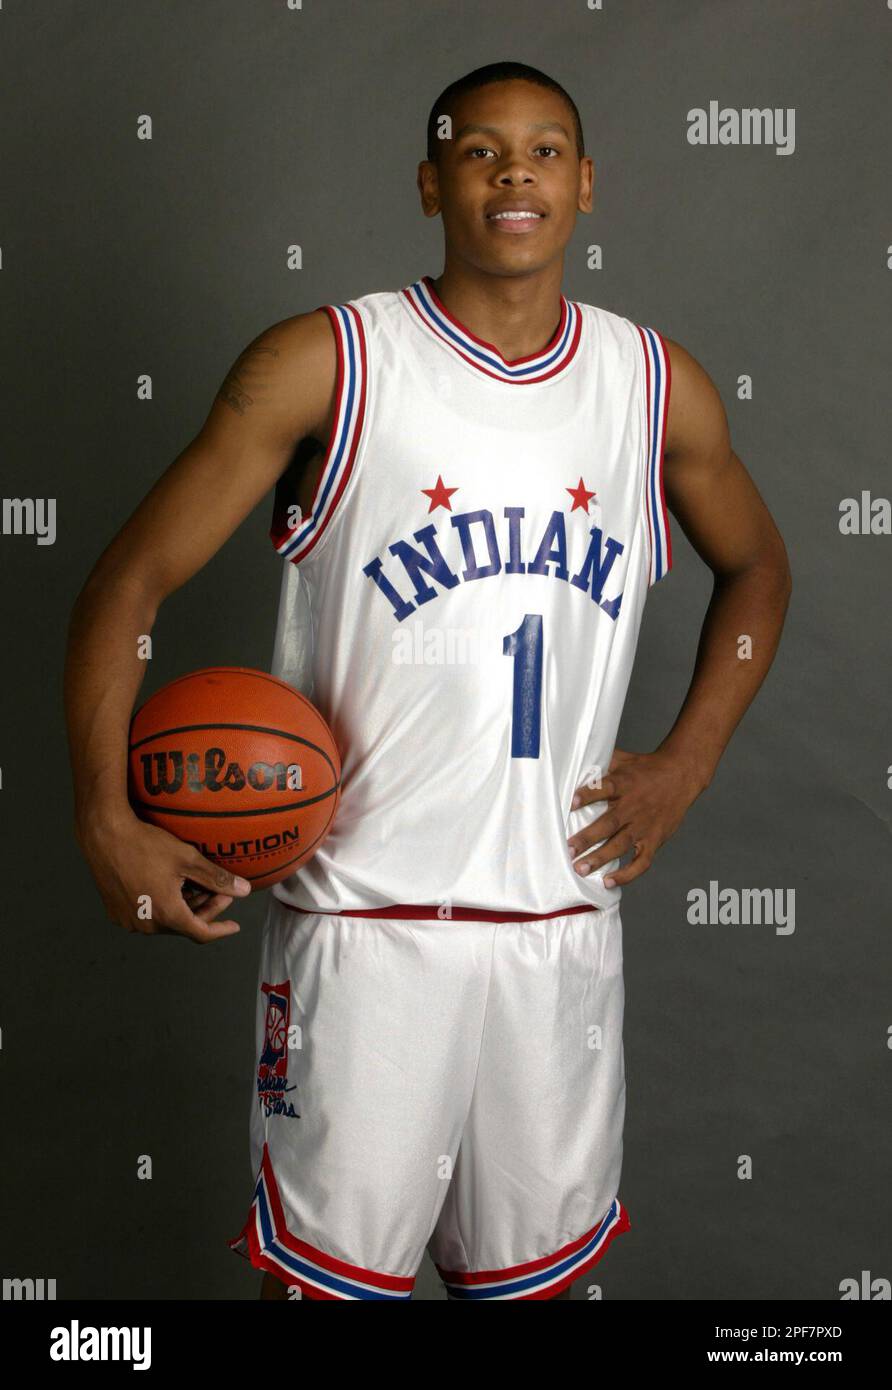 Justin Cage of Pike High School, shown Friday, April 18, 2003, in  Indianapolis, has been named Indiana's Mr. Basketball for 2003 by The  Indianapolis Star. Cage, who averaged 13.4 points and a